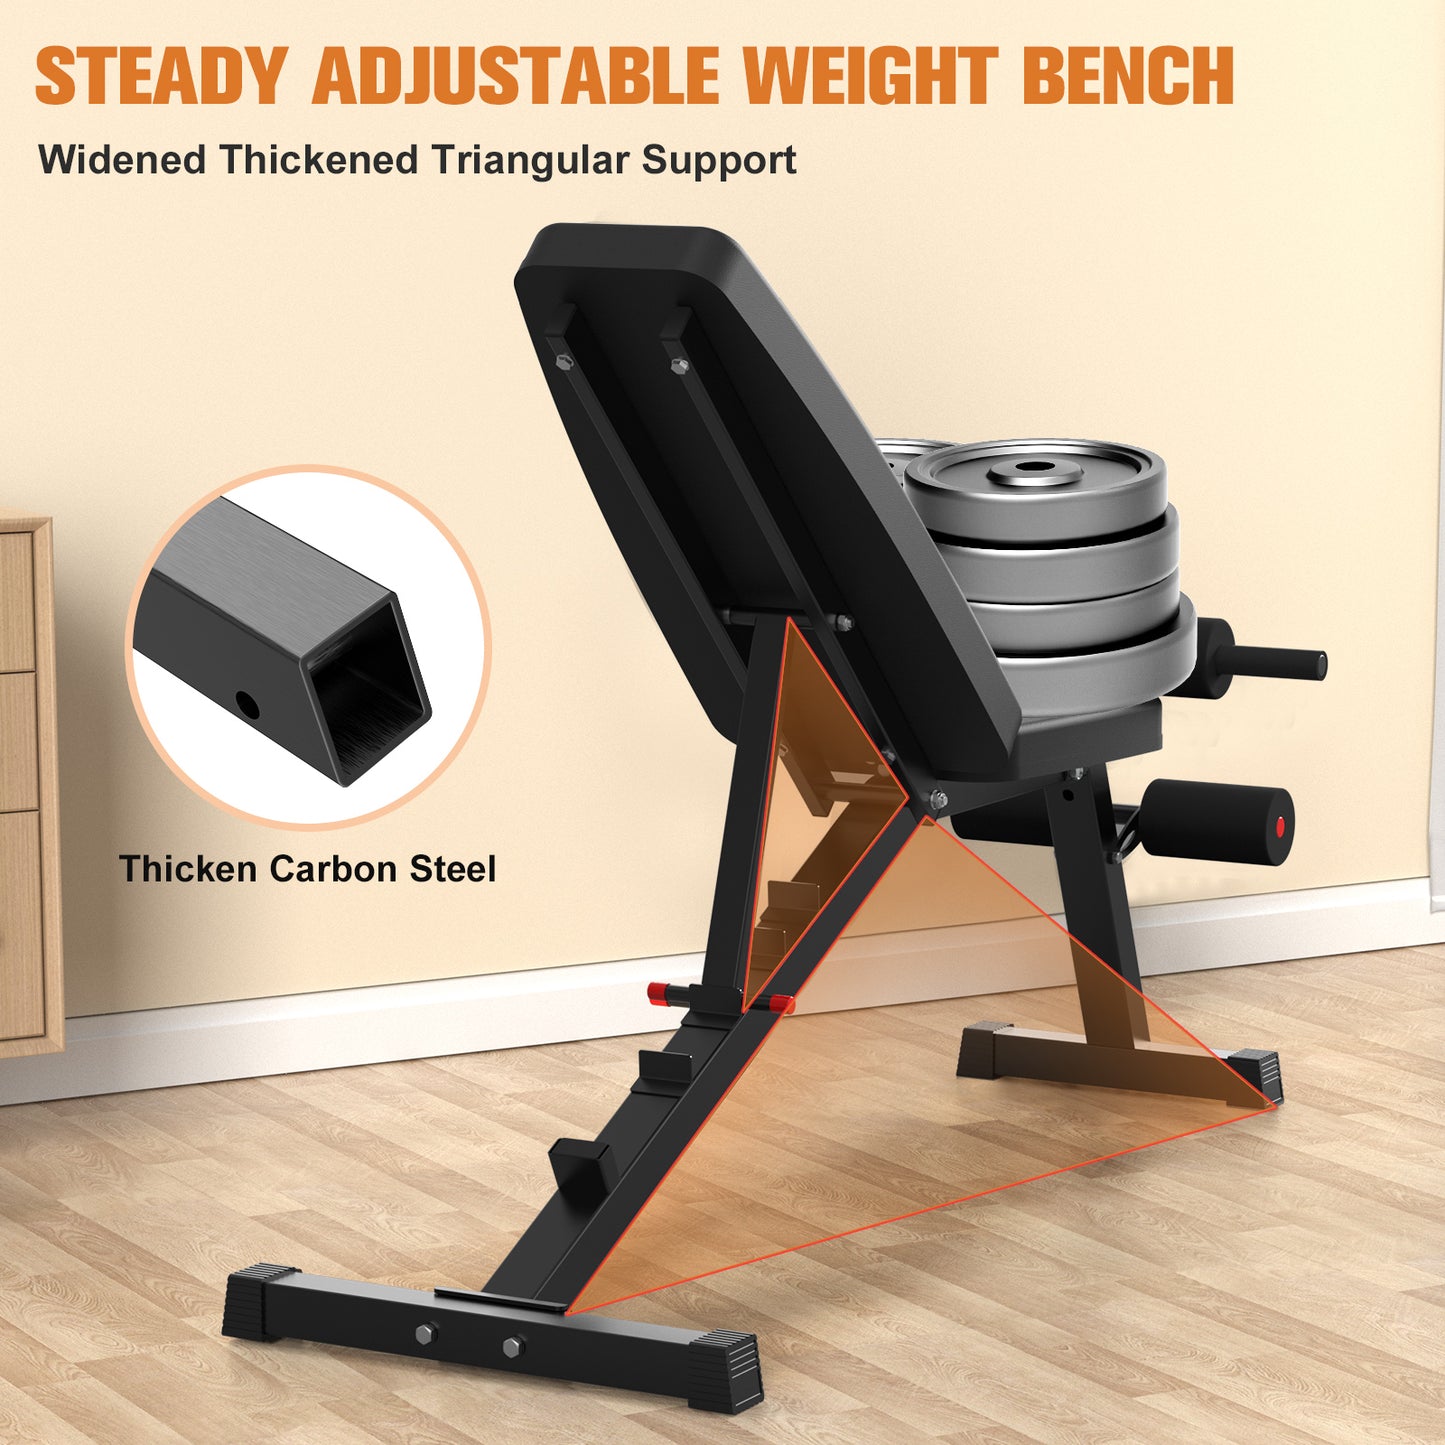 Foldable & Adjustable Workout Bench for Home Gym Strength Training